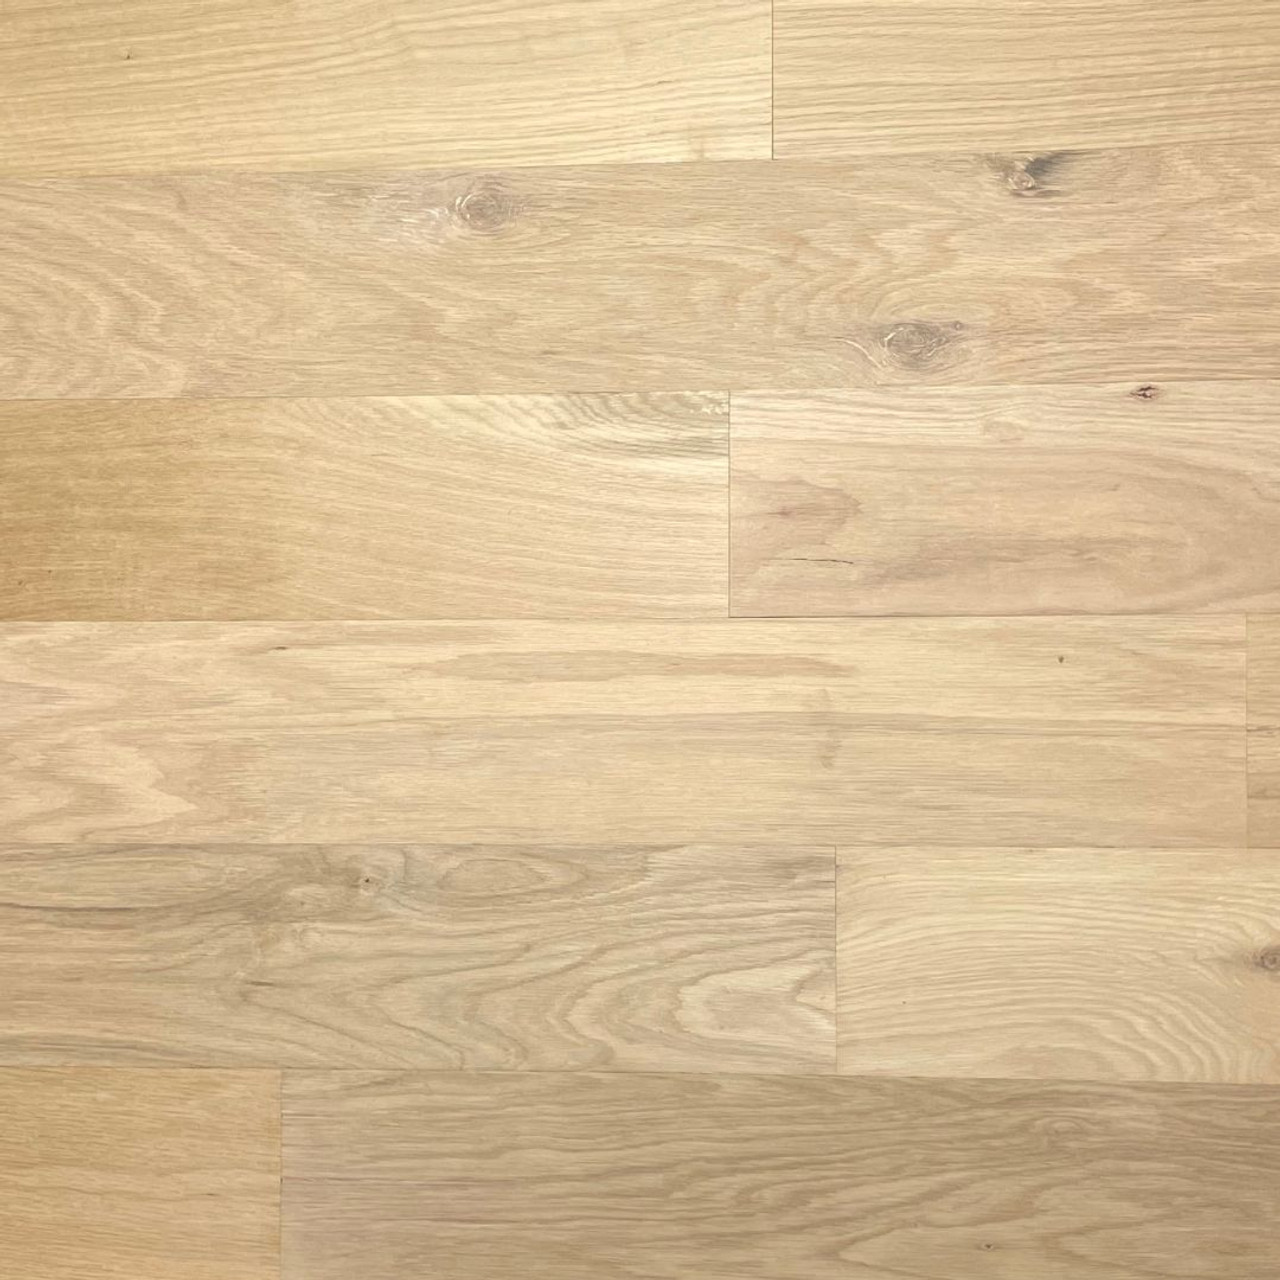 Hapwood White Oak 1/2" 5-ply Mill Crafted Hardwood Flooring (Not Eligible For Free Shipping)